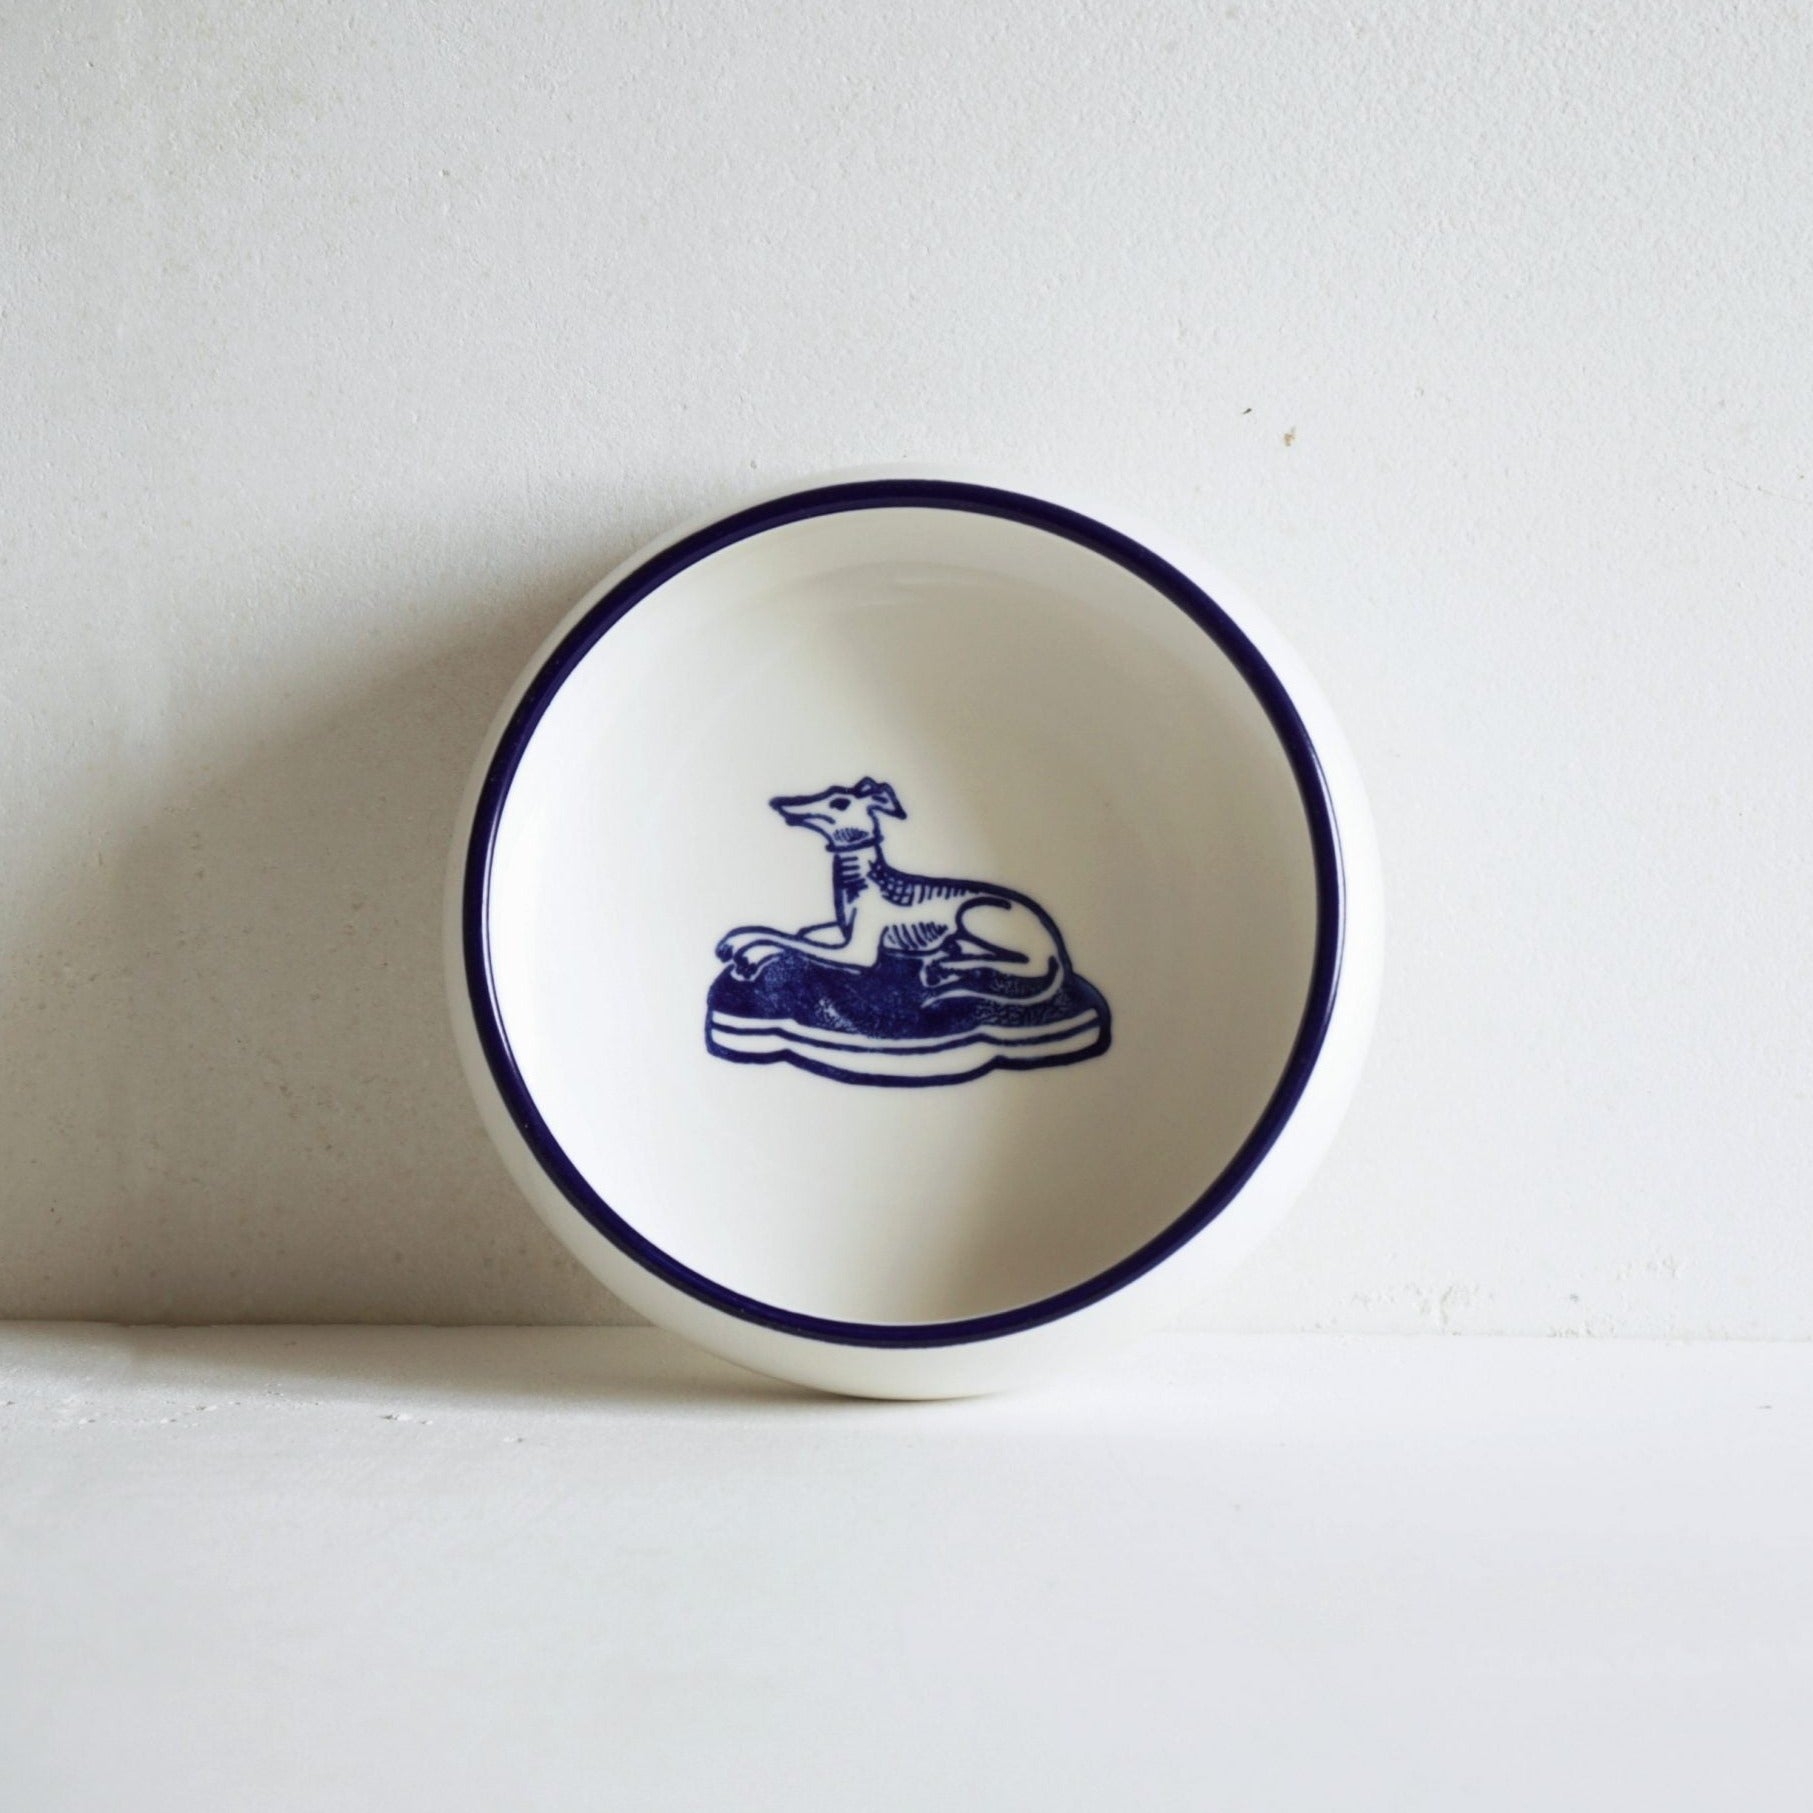 Classical Porcelain Flat Bowl with Blue Line and Hound